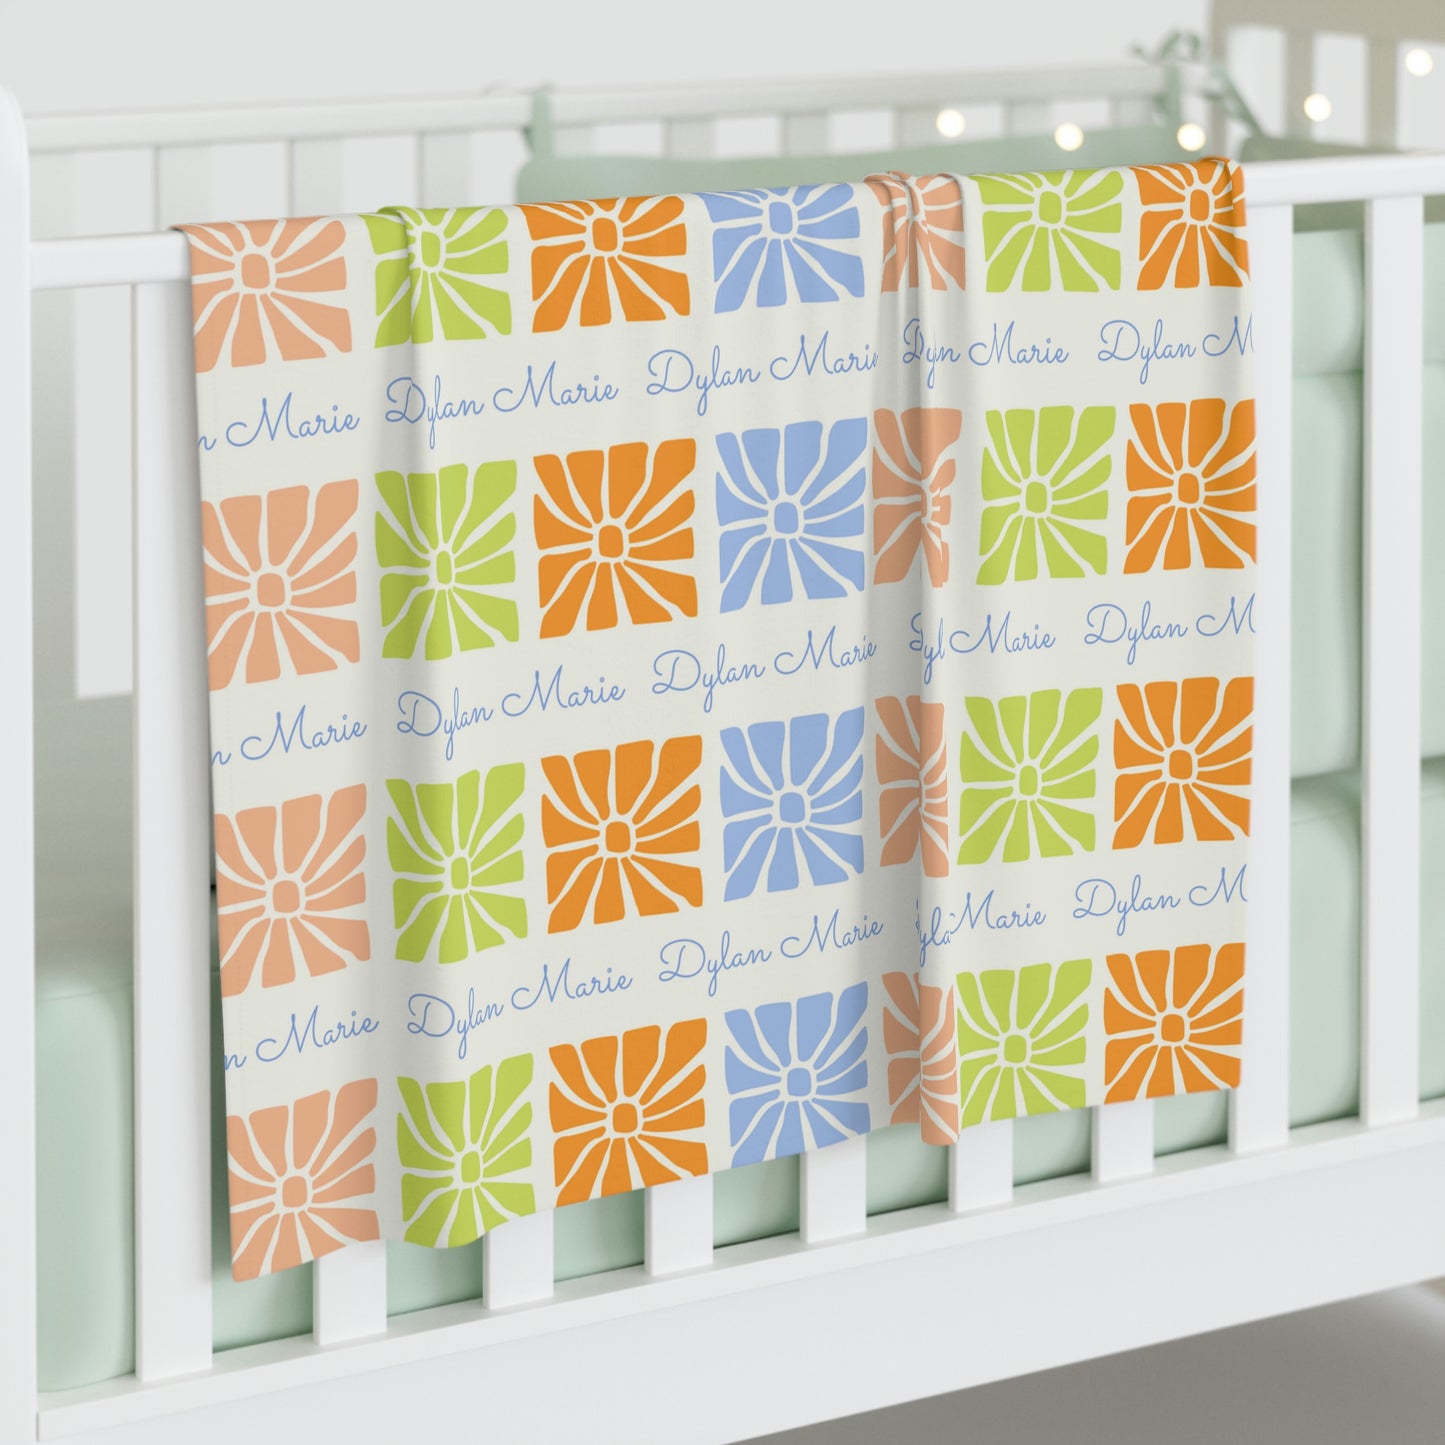 Jersey personalized baby blanket in a multi-colored boho flower pattern hung over side of white crib